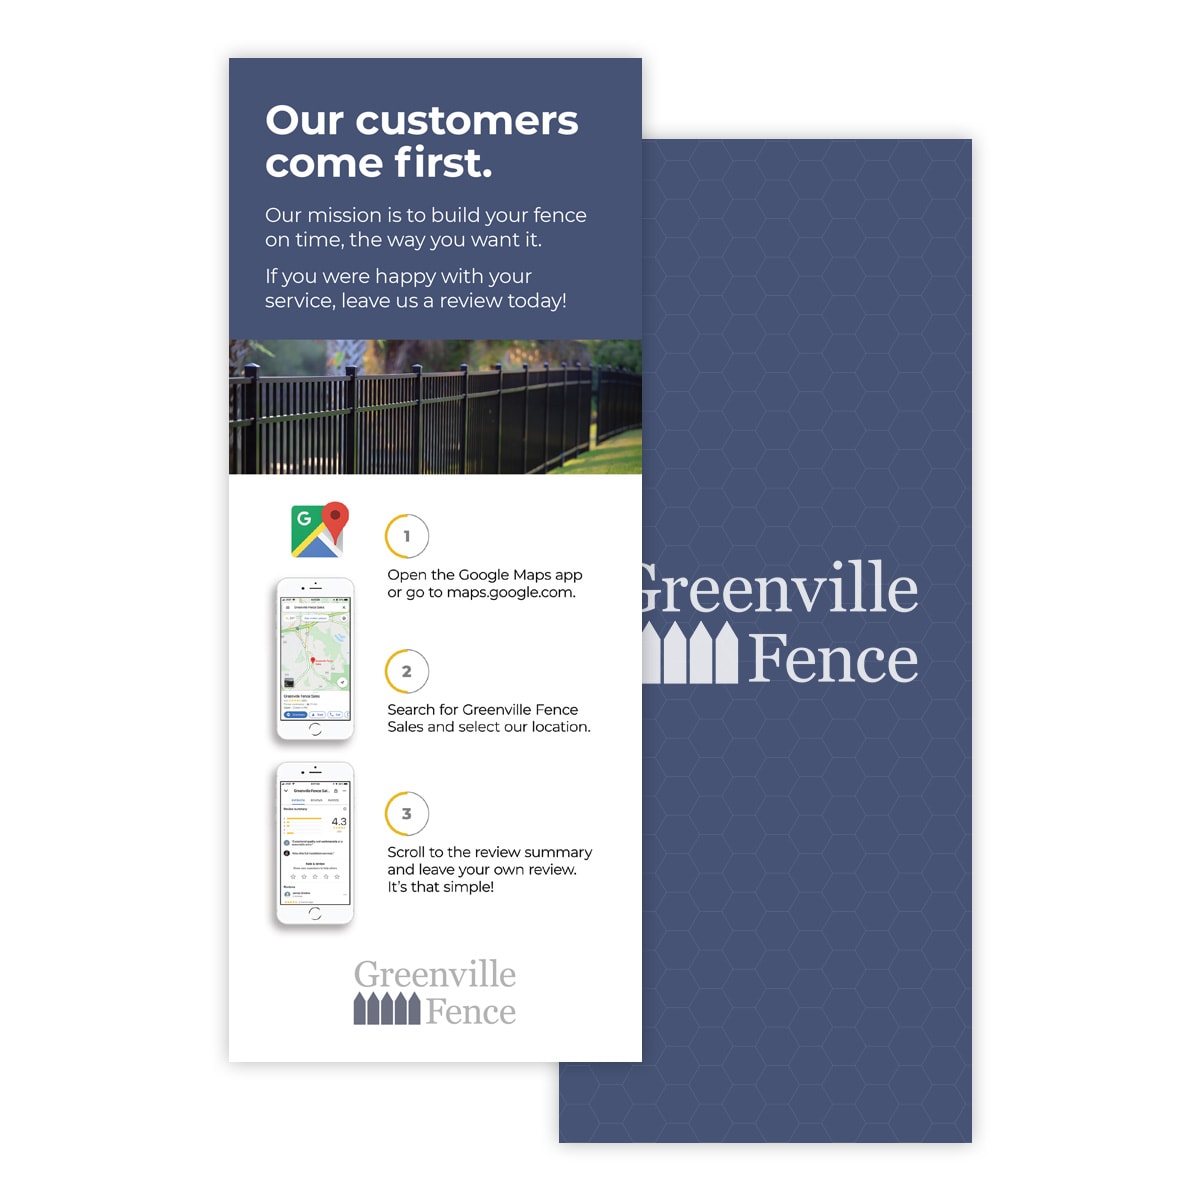 Greenville Fence infographic